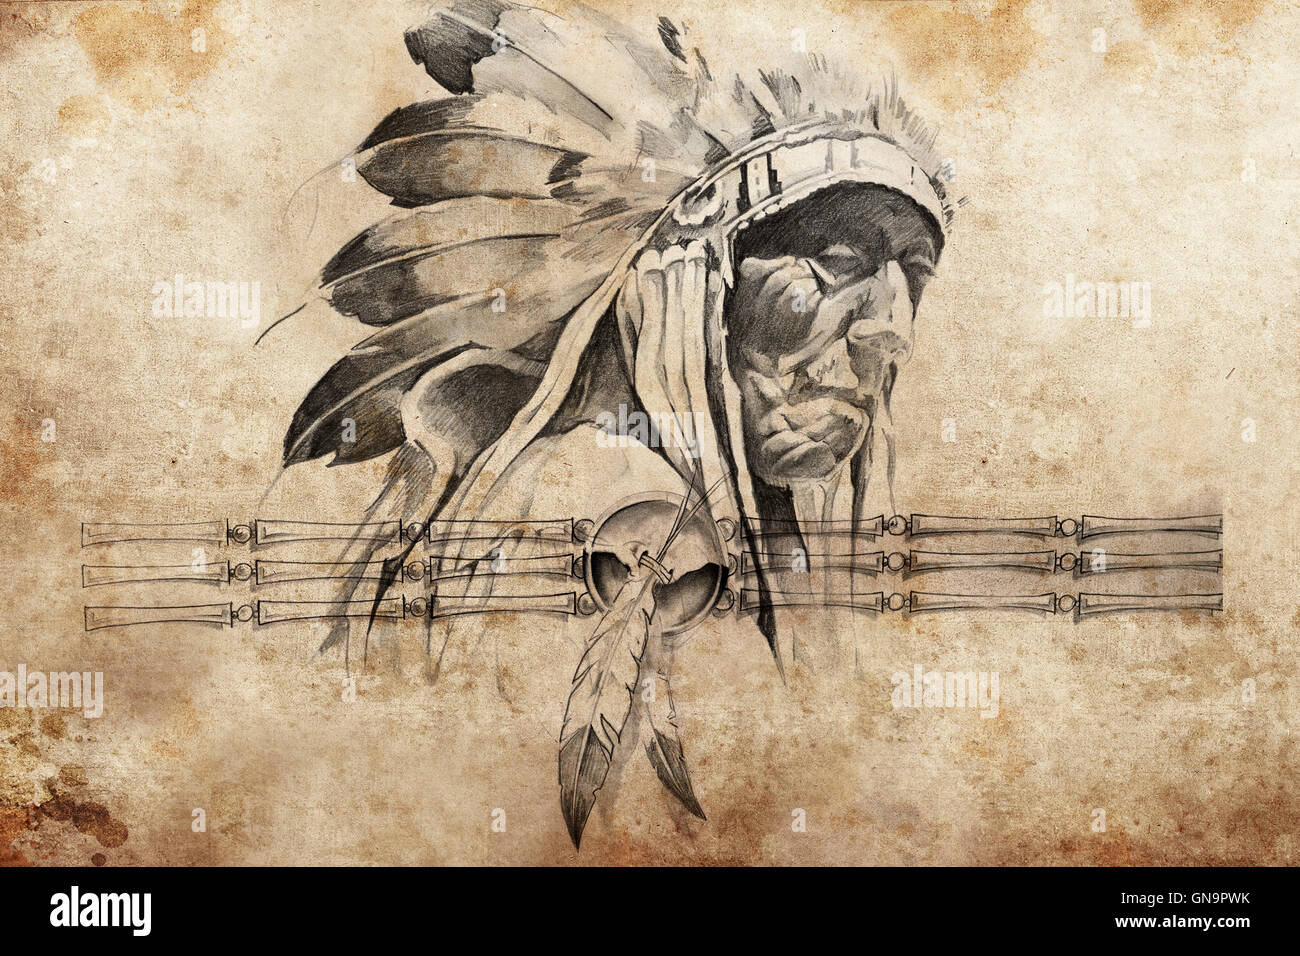 Tattoo Sketch Of American Indian Warriors, Hand Made Stock Photo, Picture  and Royalty Free Image. Image 32340848.